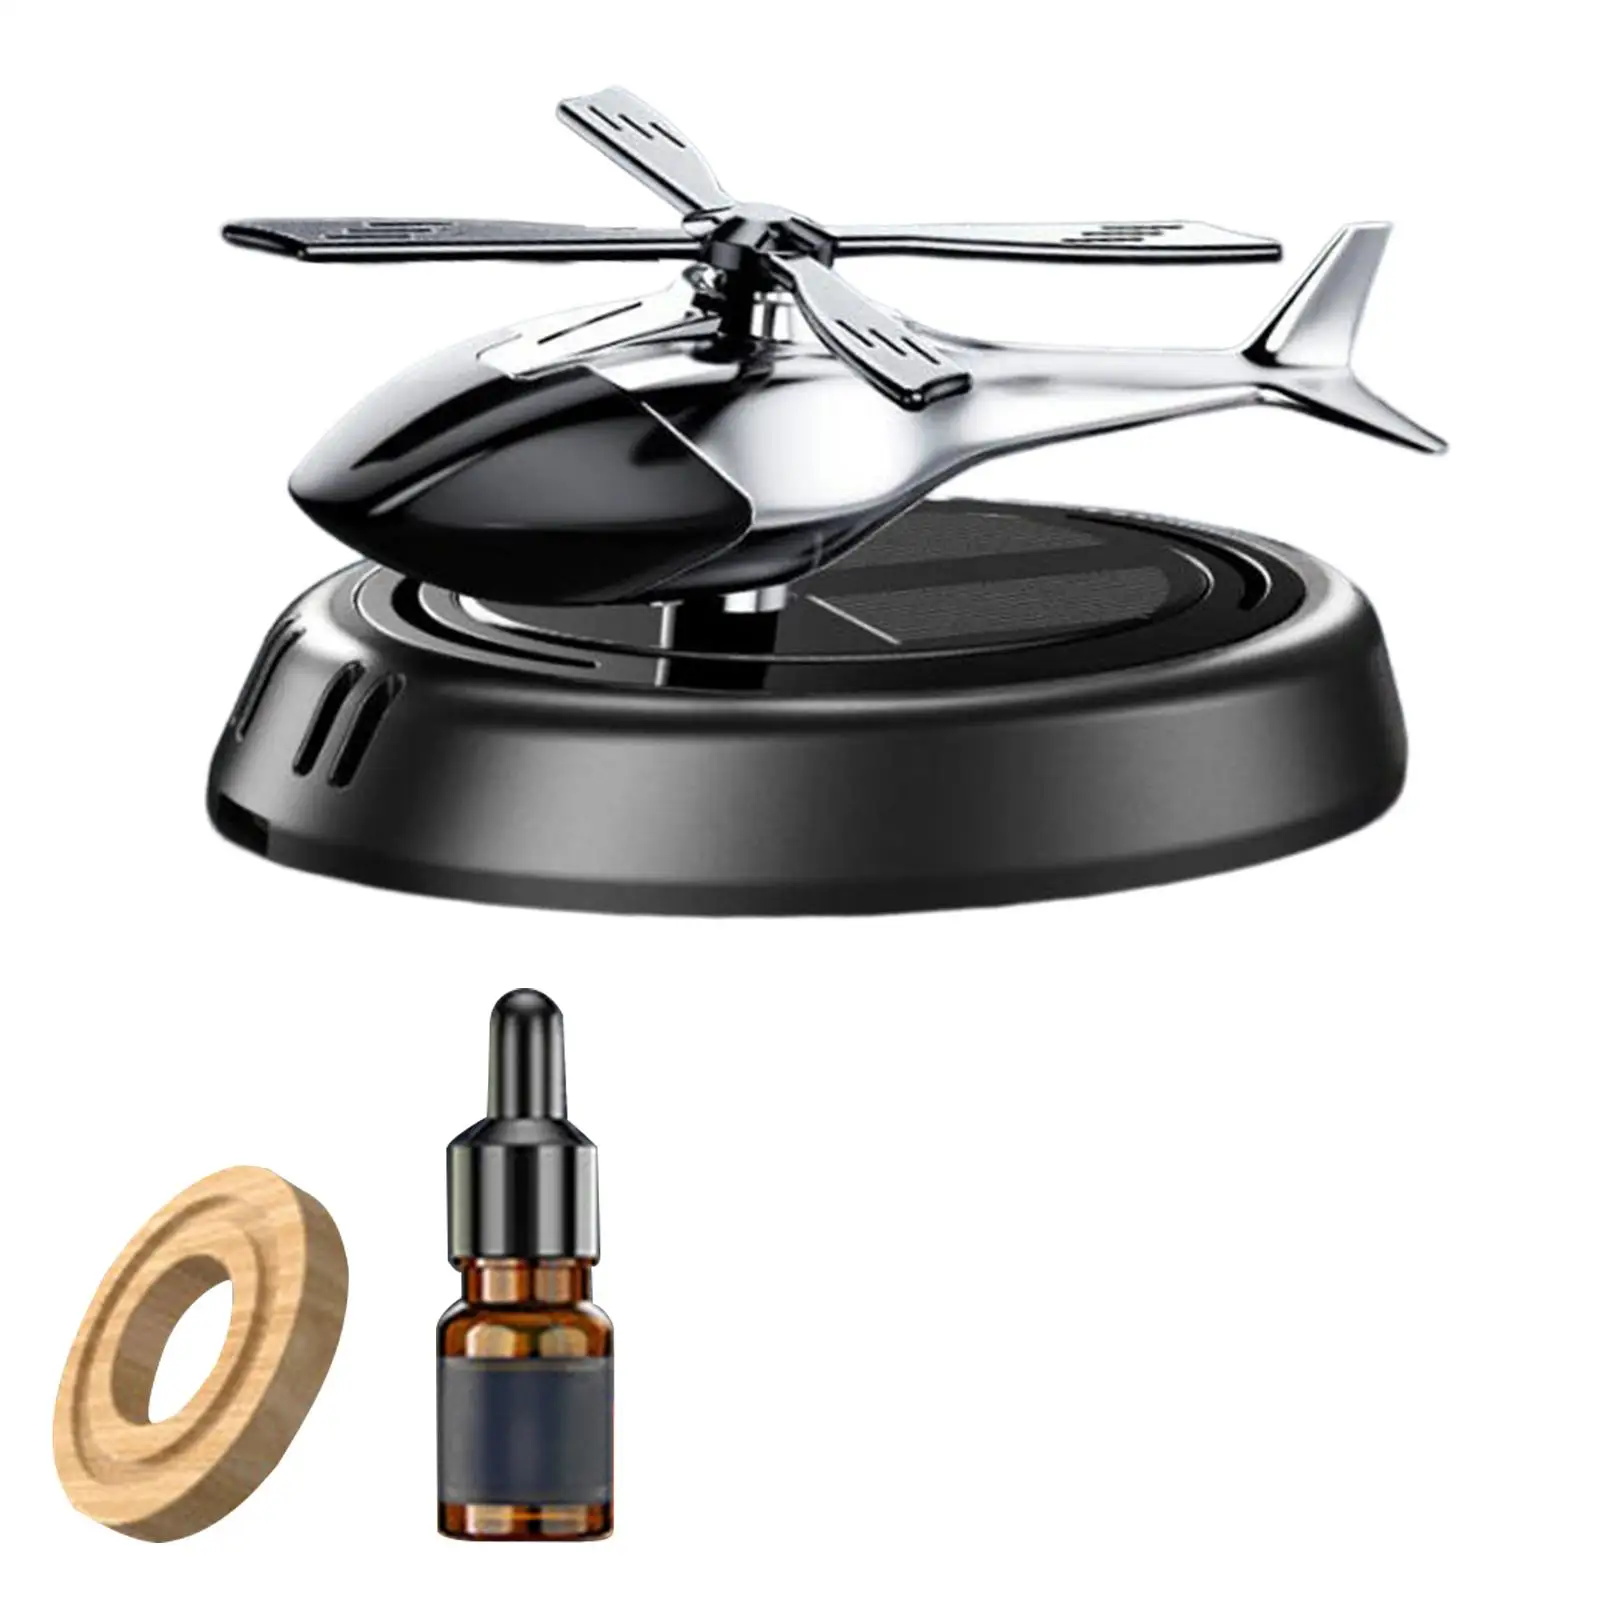 Solar mute Gift Solar Autorotation Dual Frequency Mode Perfume Diffuser Decor Helicopter Car Air Freshener